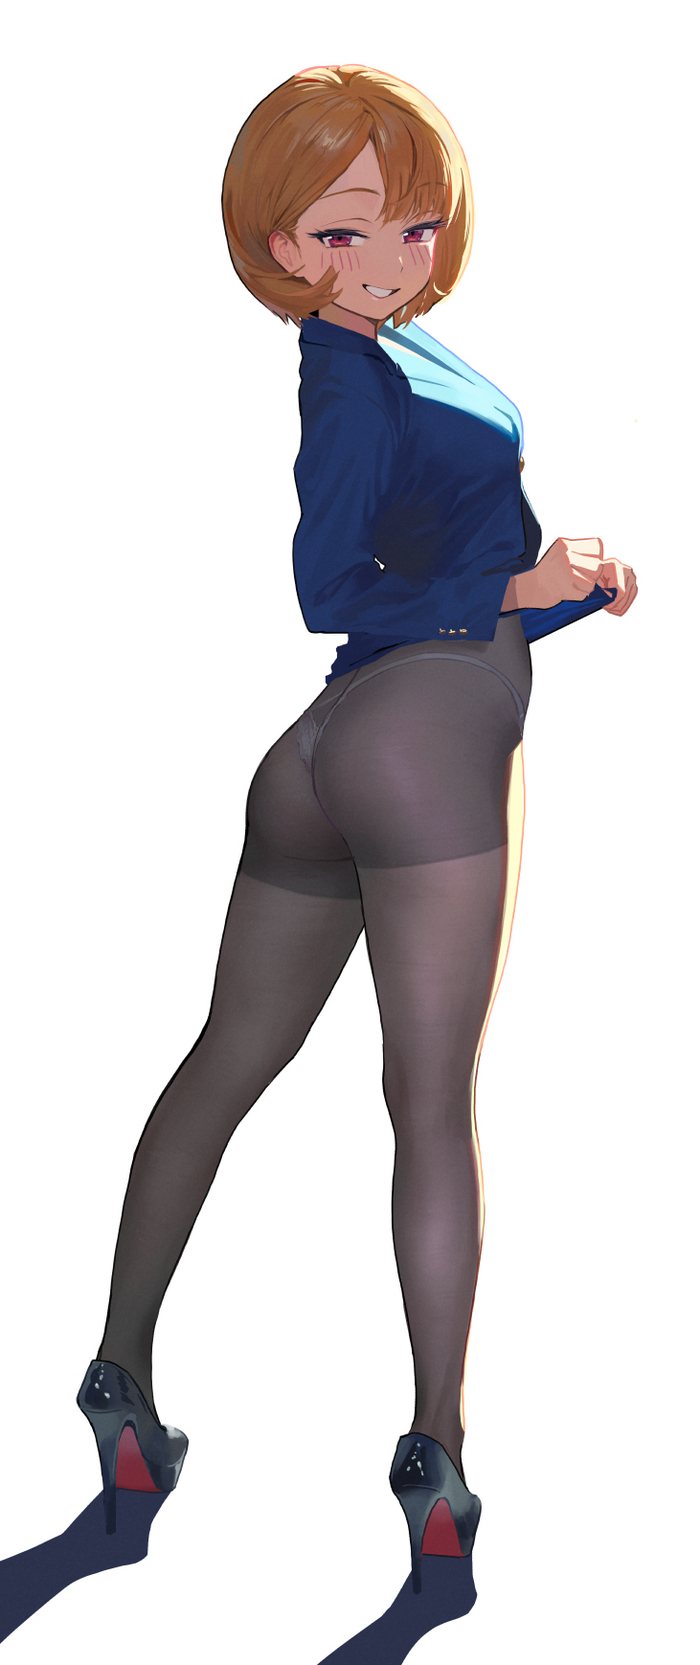 Are you enjoying the view? - NSFW, Anime, Anime art, Some1else45, Tights, Booty, High heels, Office workers, Longpost, Pantsu, Original character